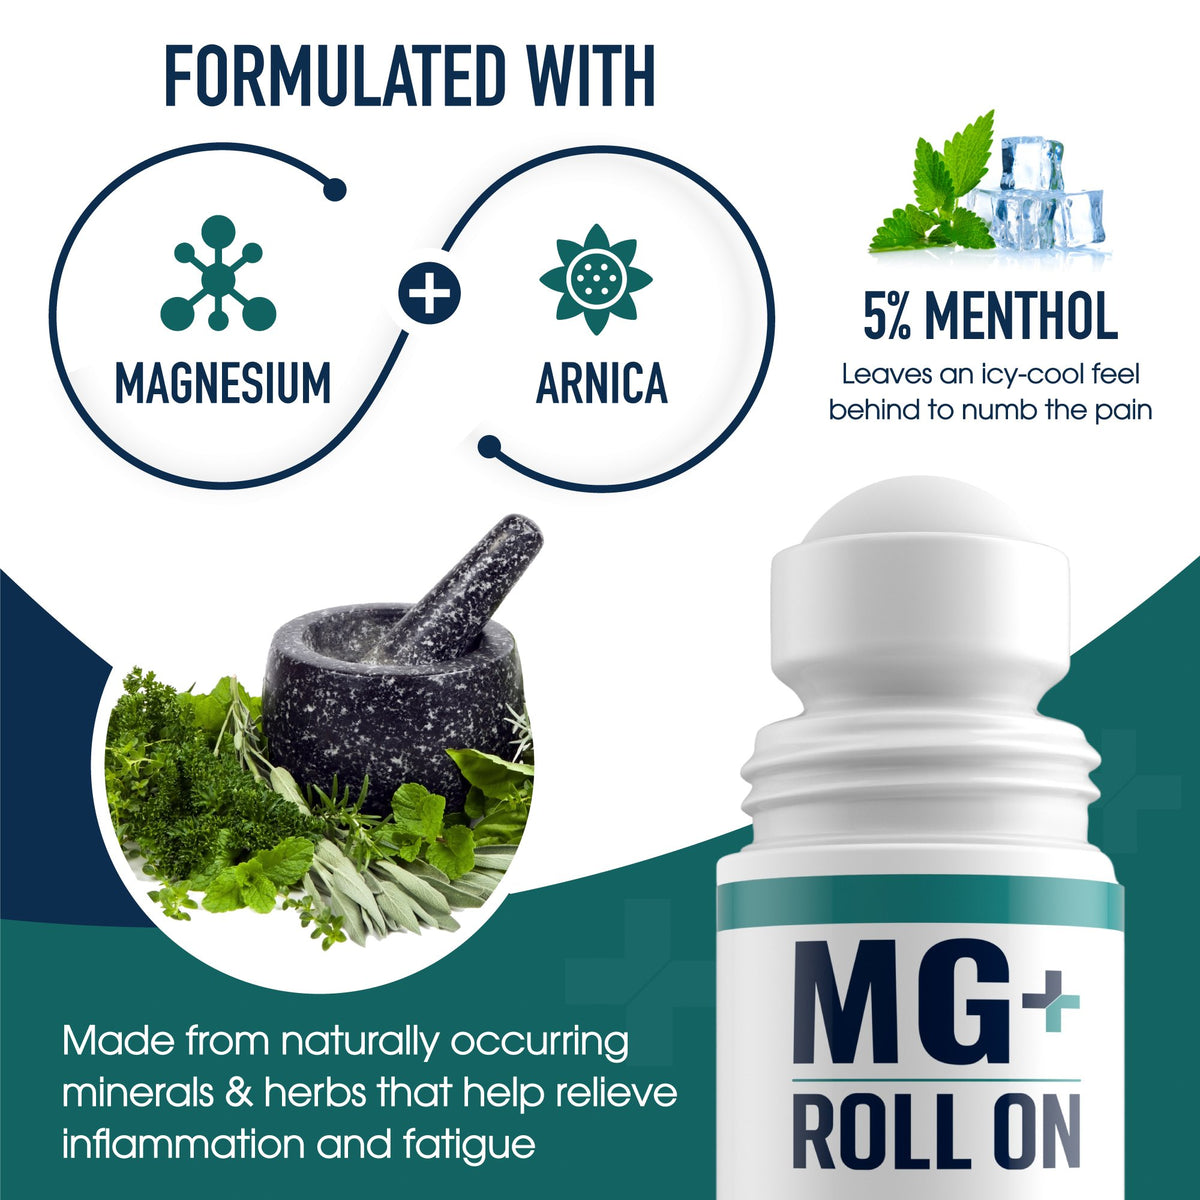 Mars Wellness MG+ Cooling Roll on Pain Relief (3 oz) – Fast Acting Arnica Roll on 5% Menthol Magnesium & Arnica – Penetrating Menthol Pain Relief Roll On Topical Pain Relief, Aches, Sore Muscle Pain